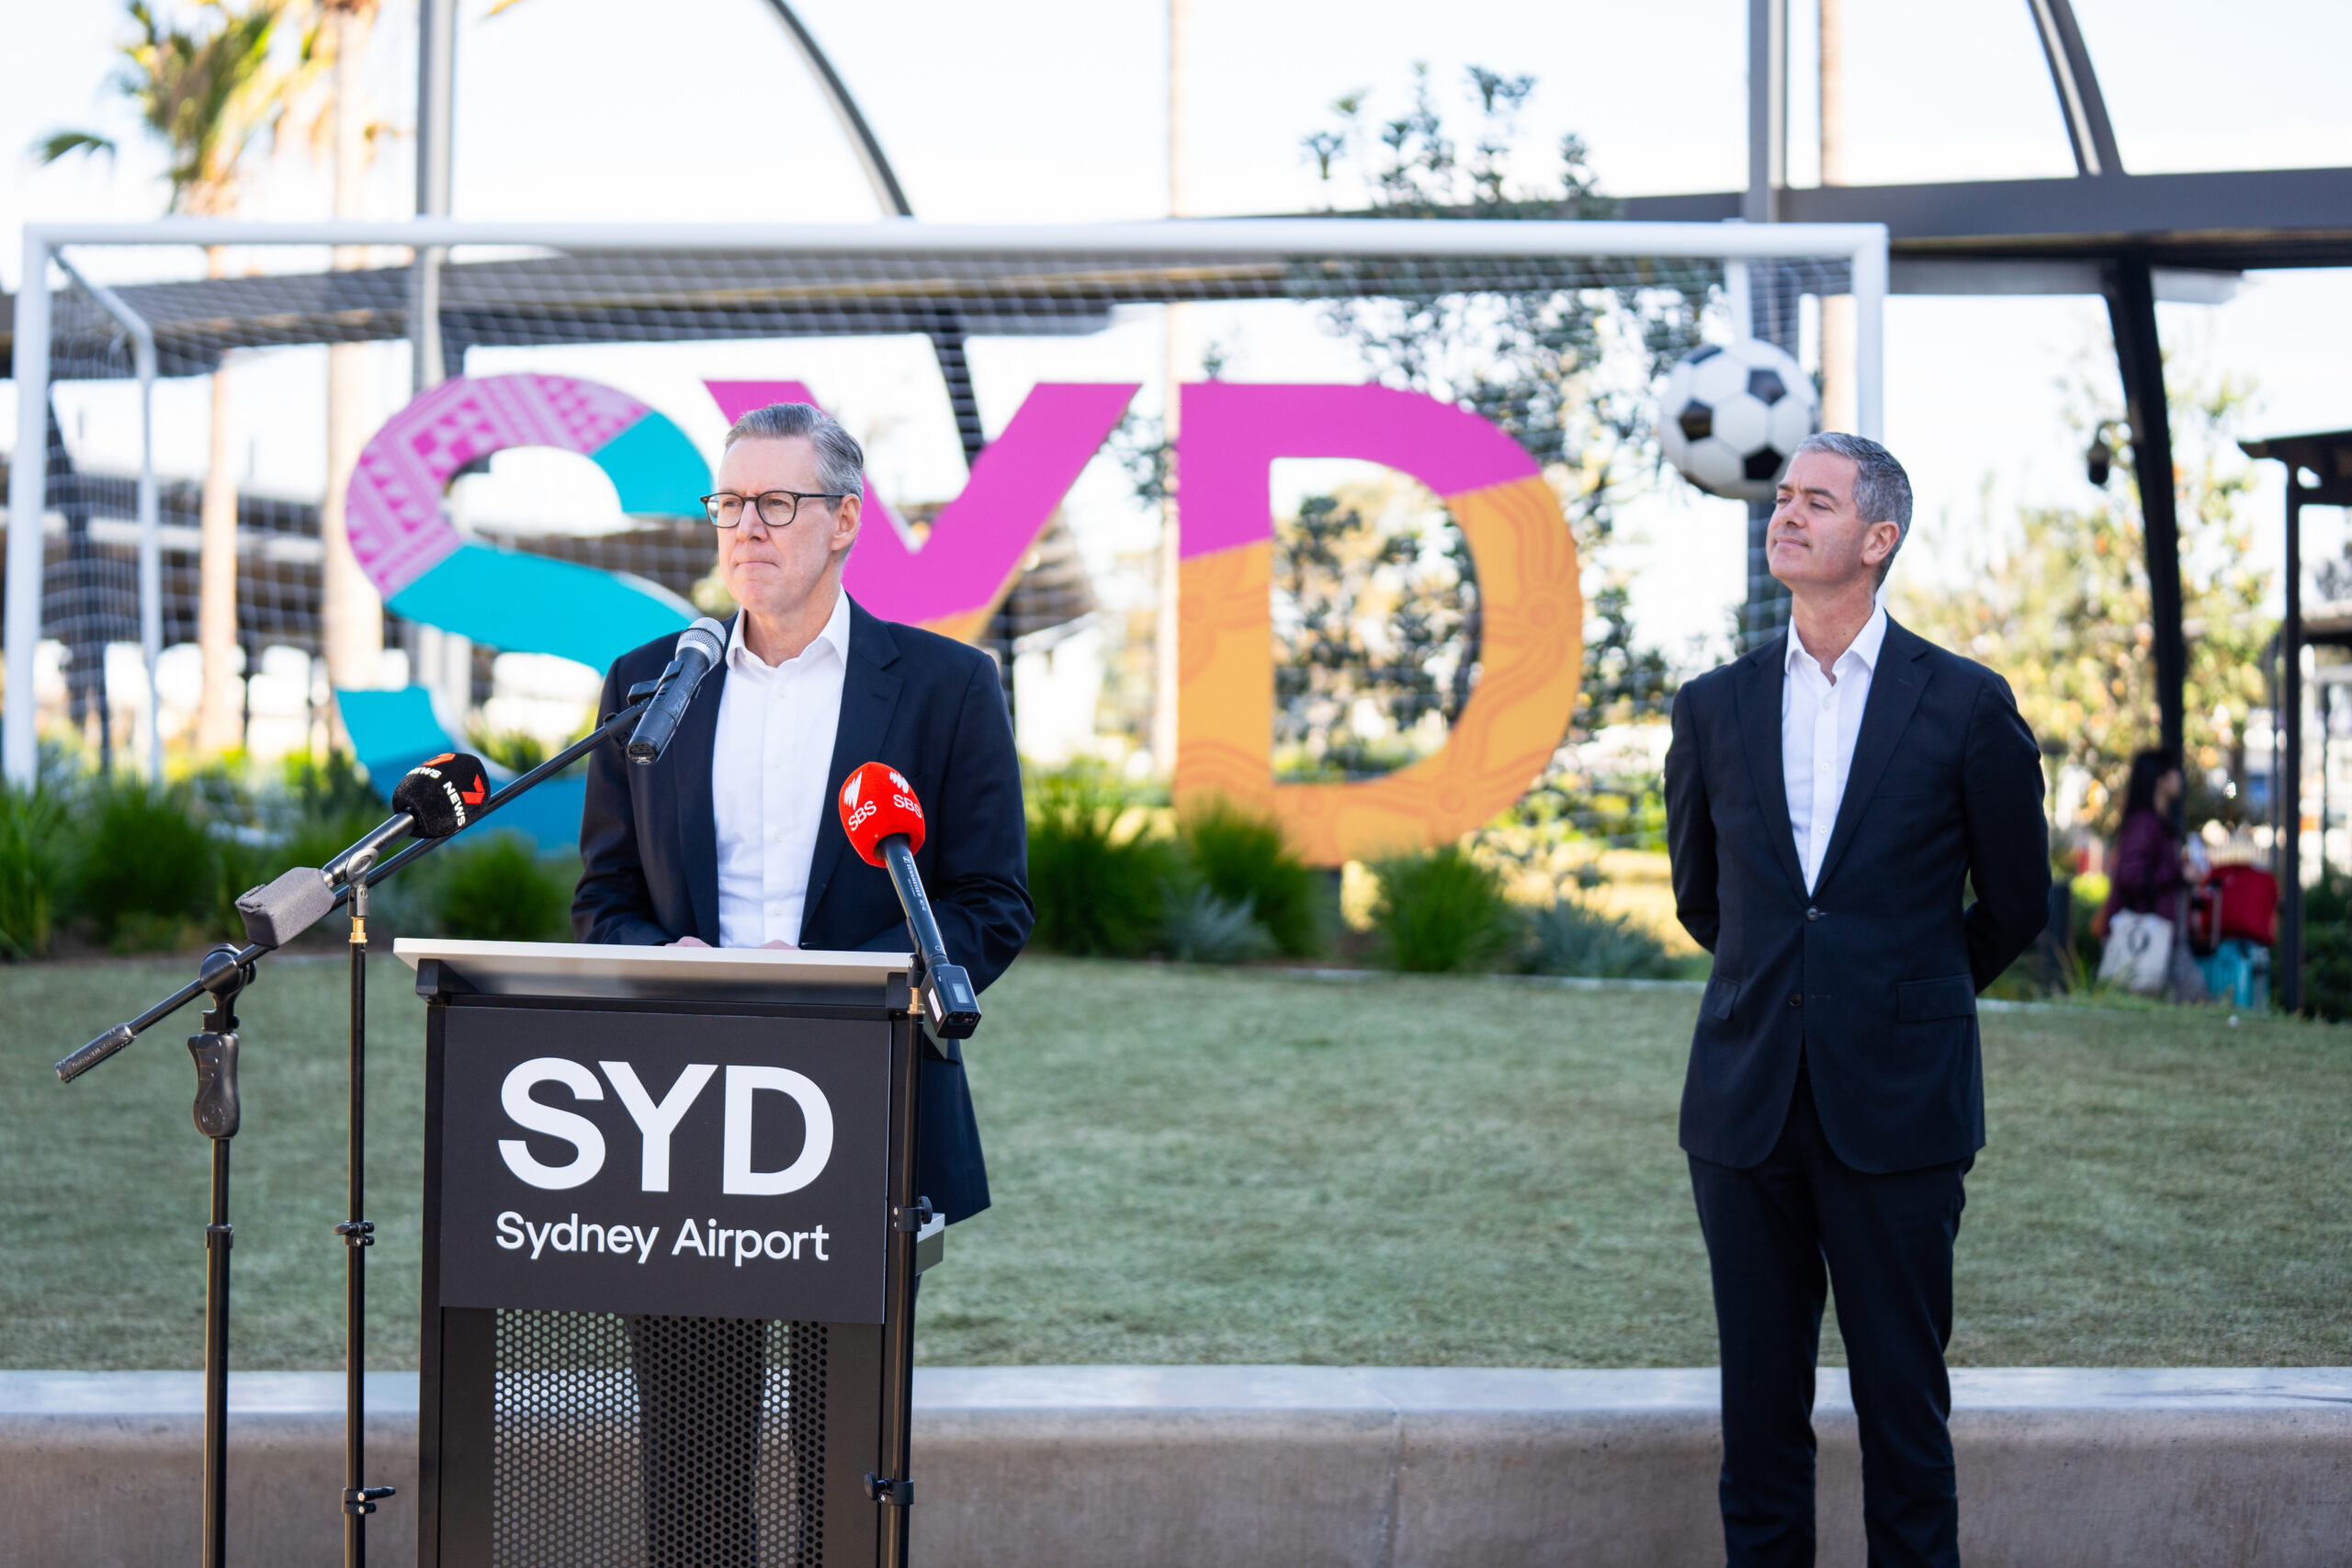 Sydney Airport has officially opened its new T1 International Arrivals Forecourt to be enjoyed by millions of international travellers every year